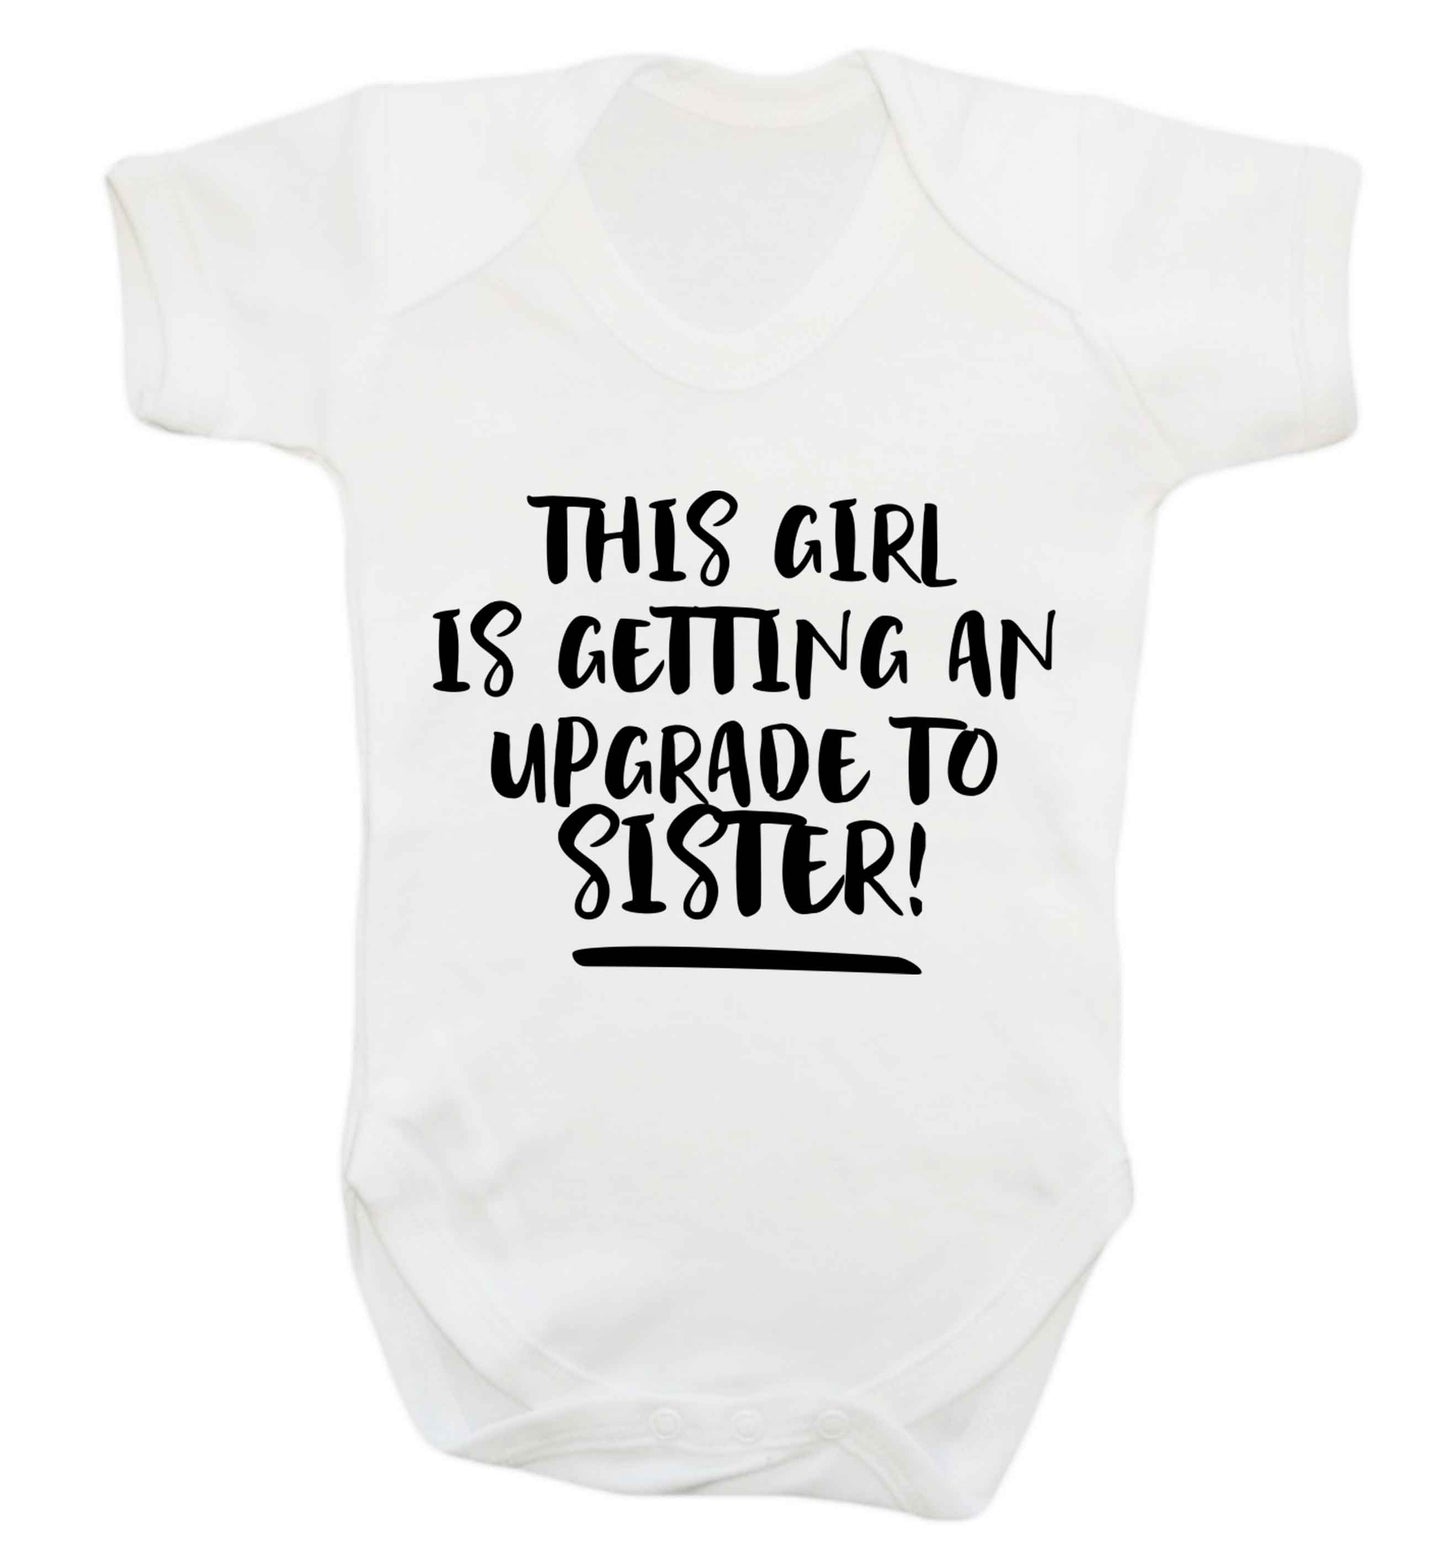 This girl is getting an upgrade to sister! Baby Vest white 18-24 months